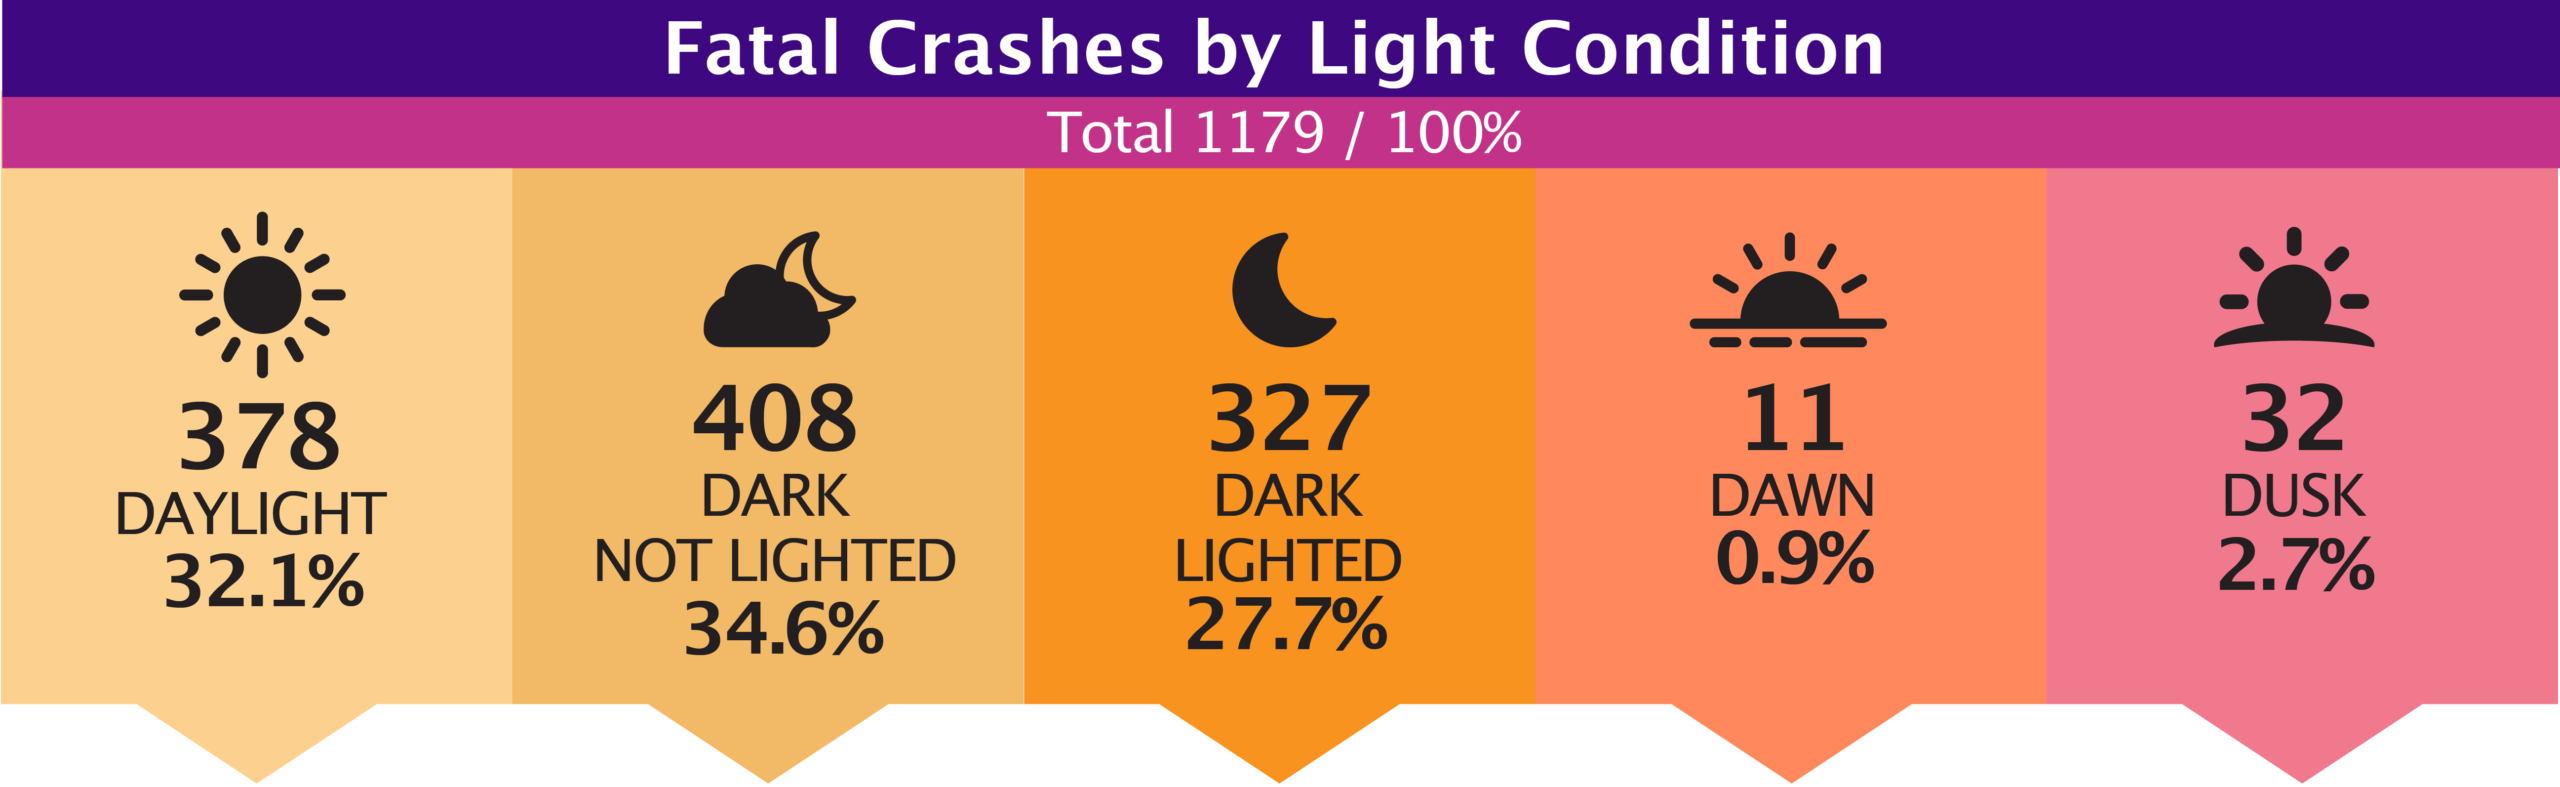 Fatal Crashes by Light Condition